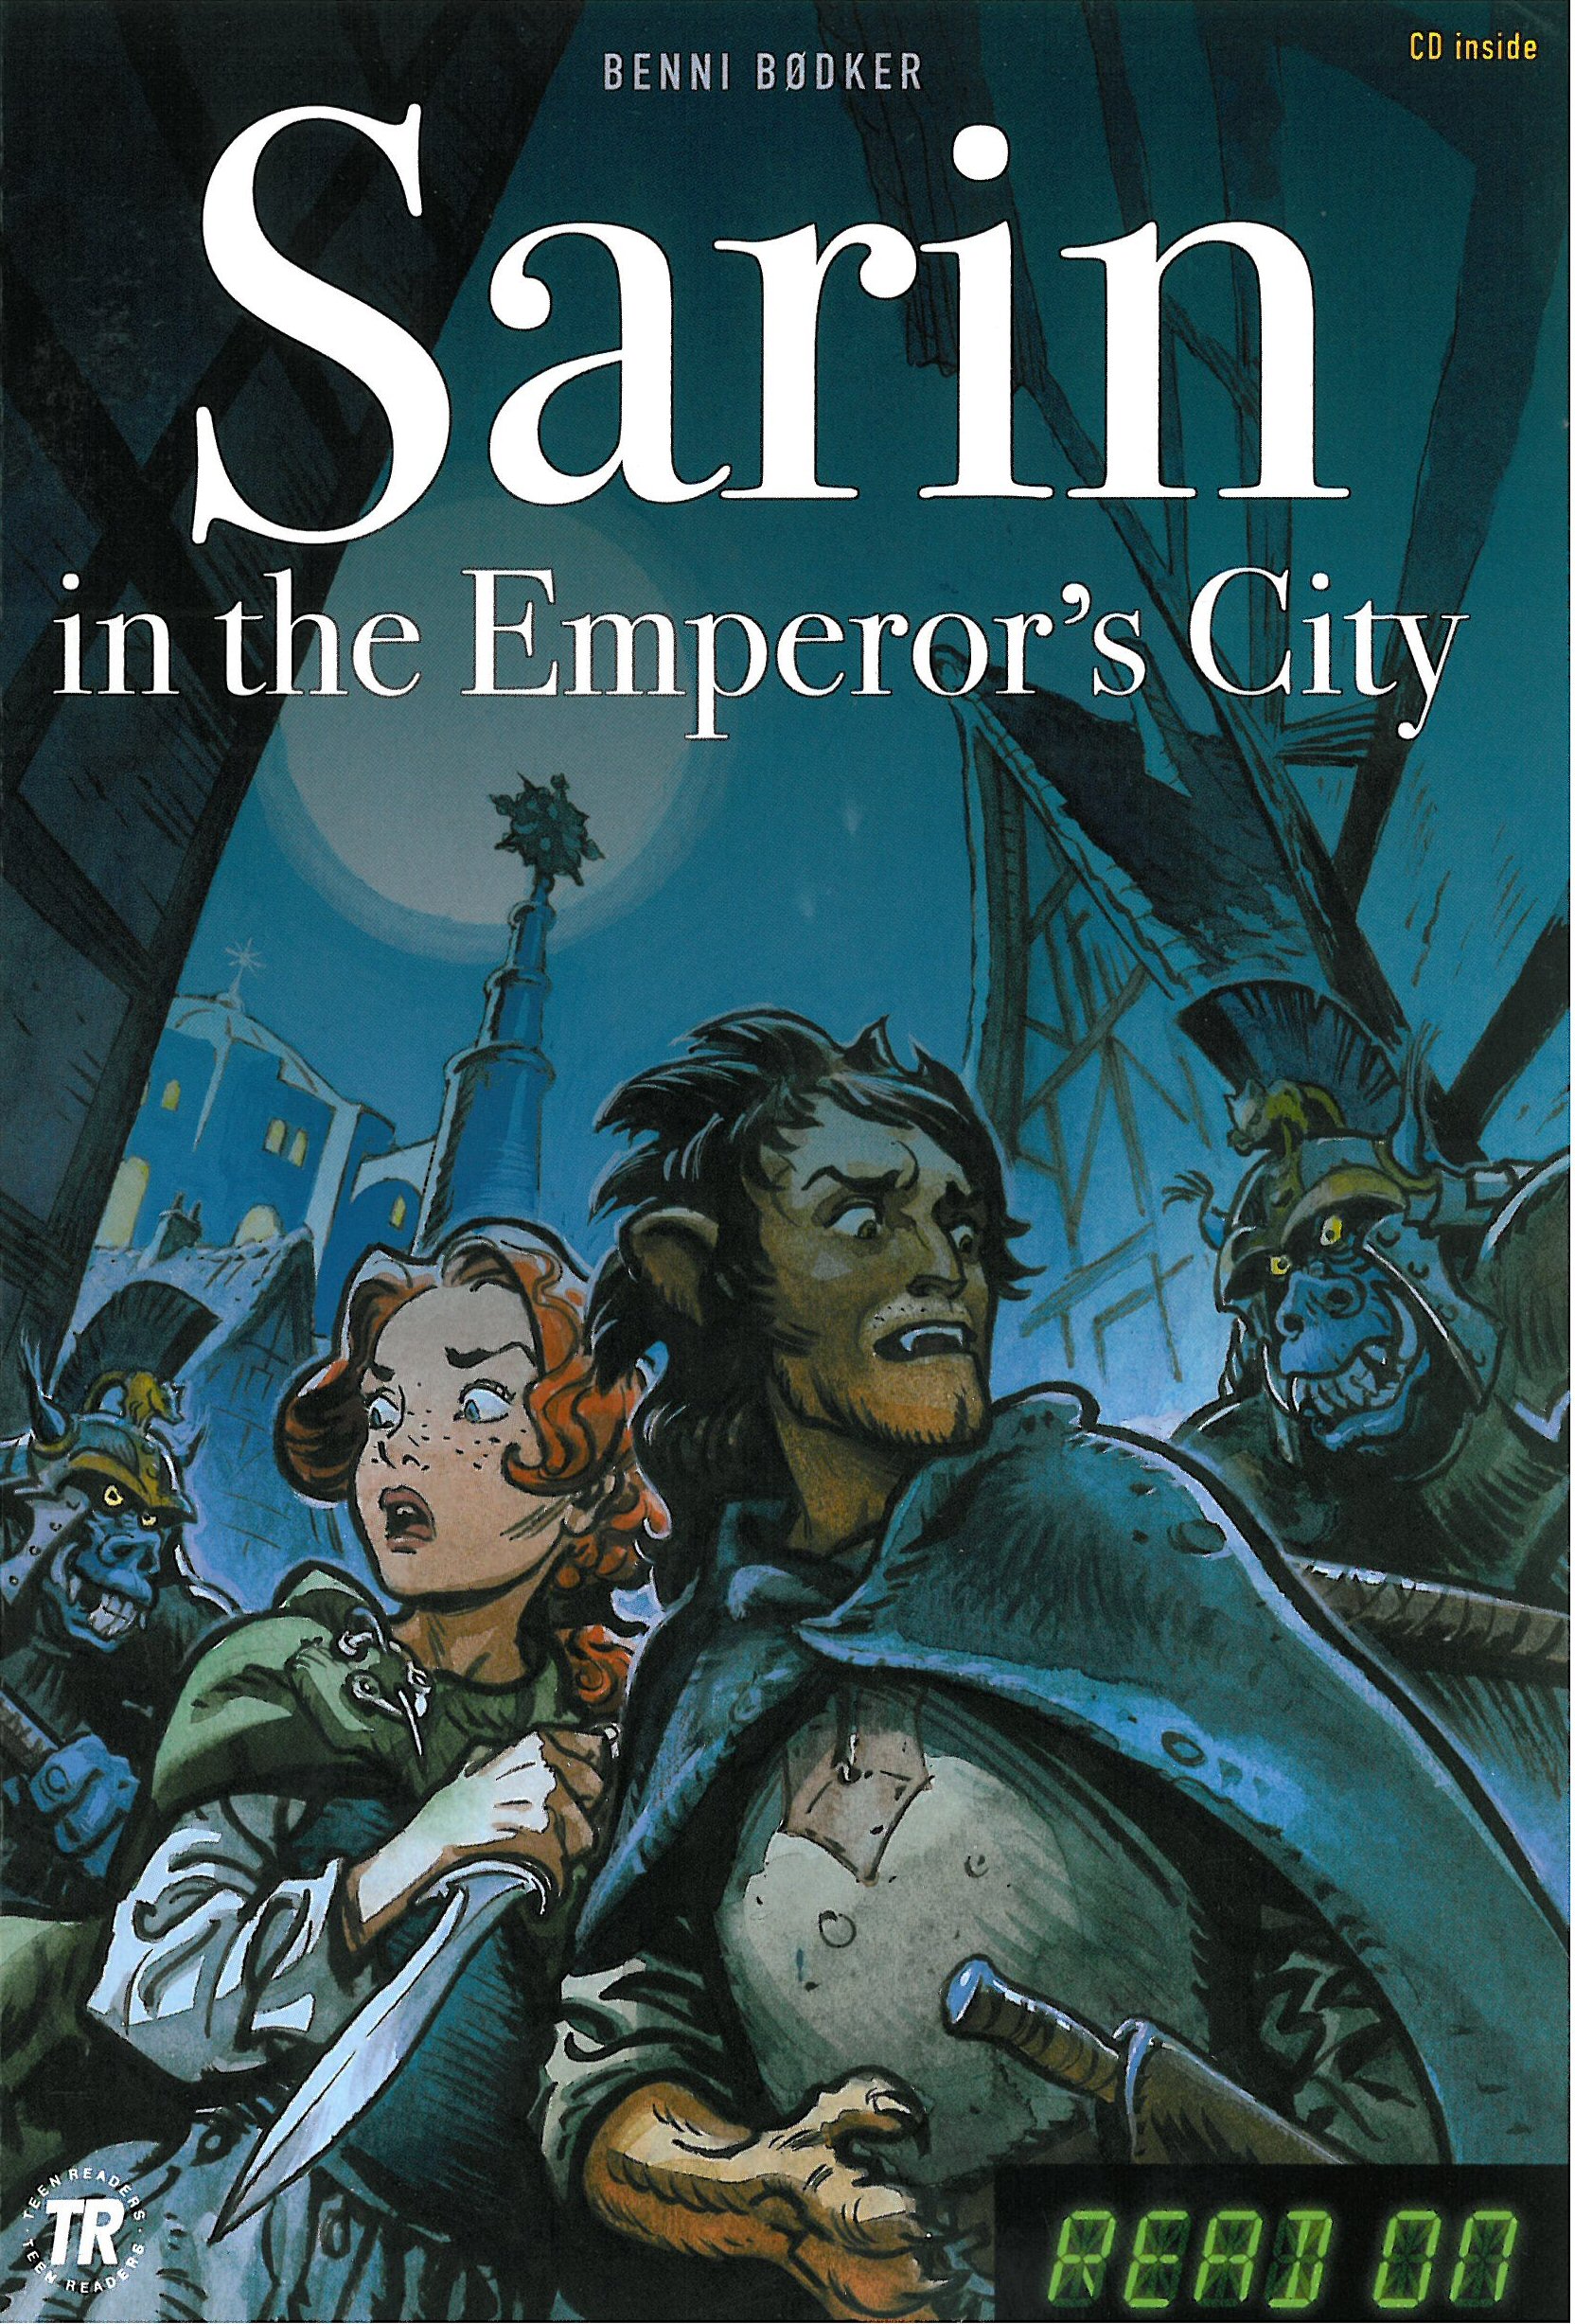 Sarin in the Emperor's City - READ ON series 